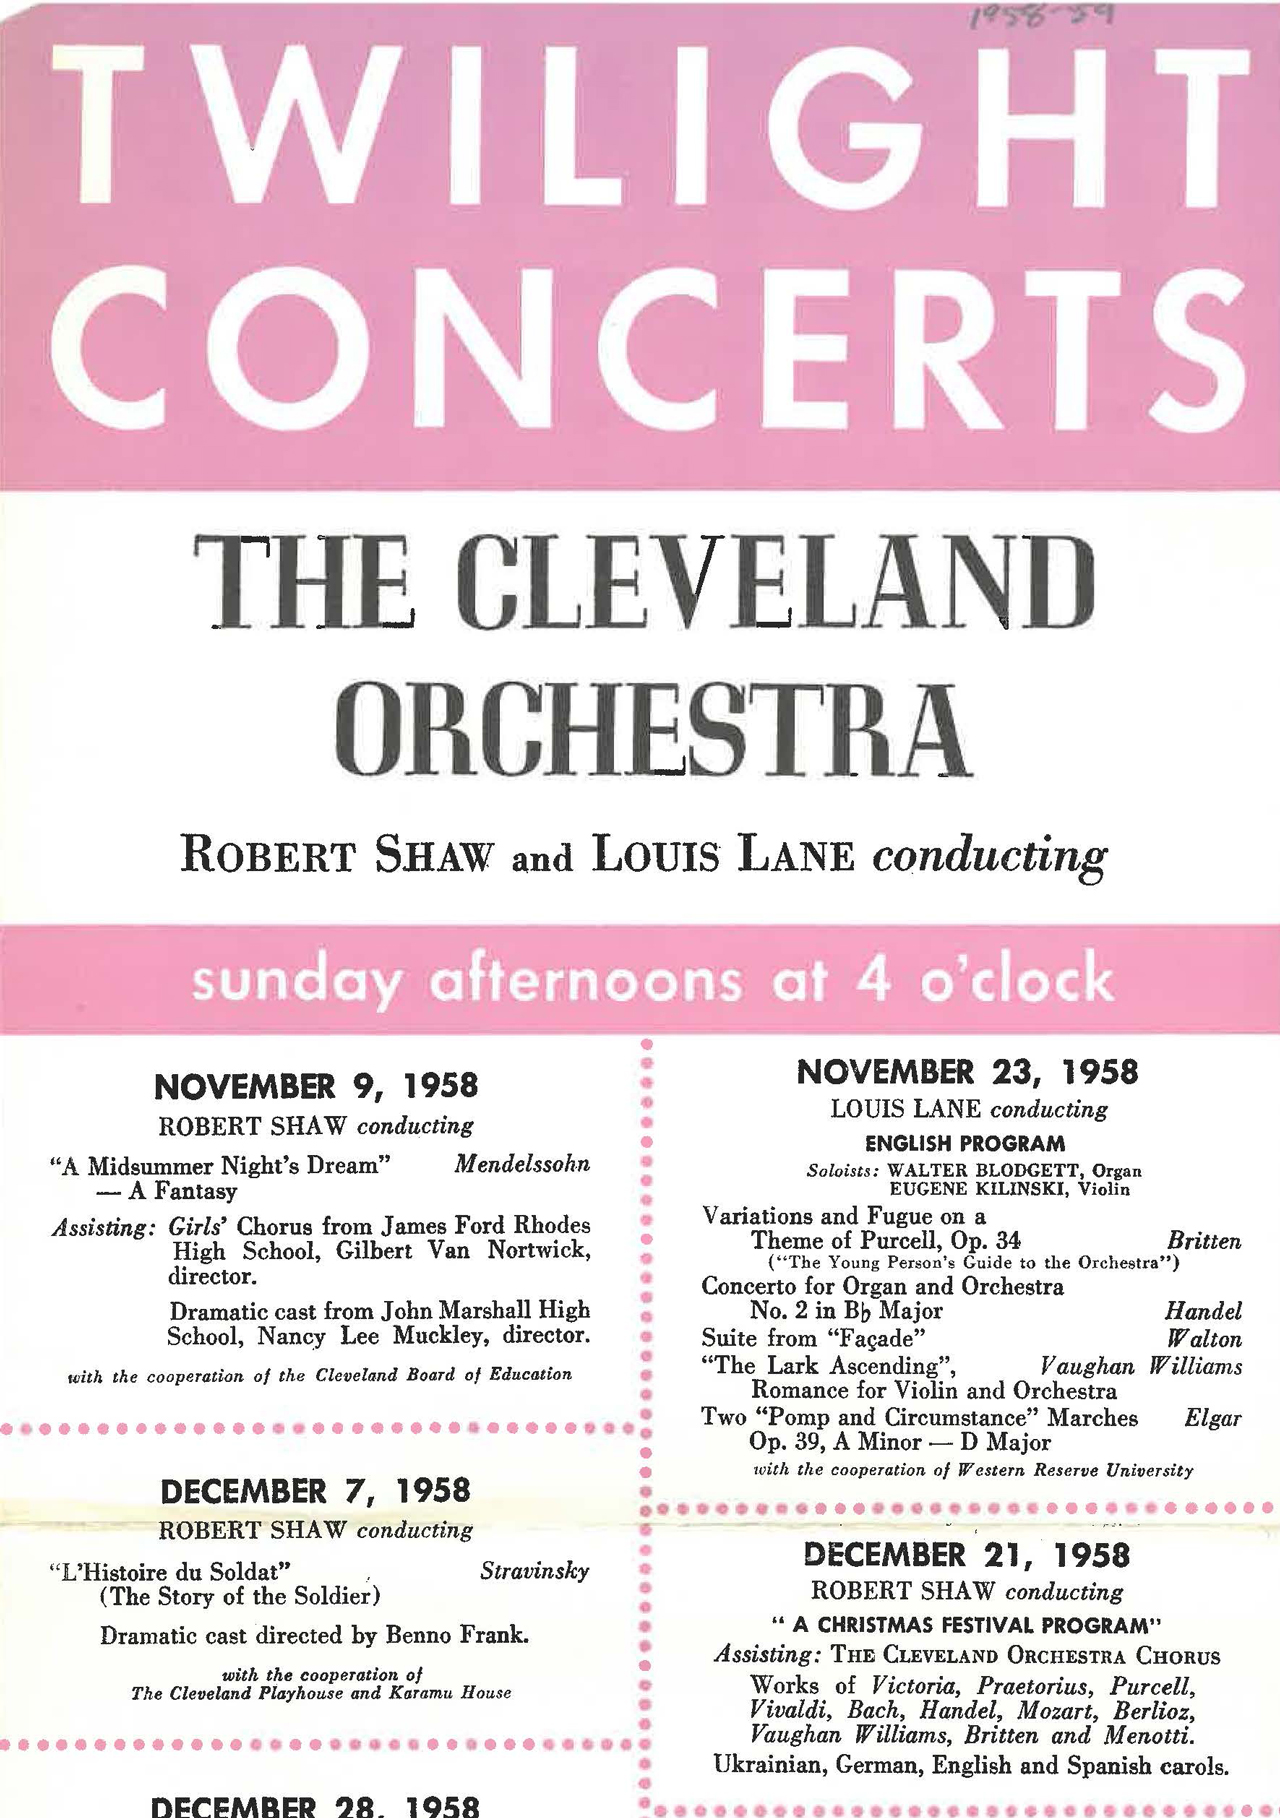 Advertisement for the Twilight Concerts series with Robert Shaw’s Christmas program featured on the bottom right